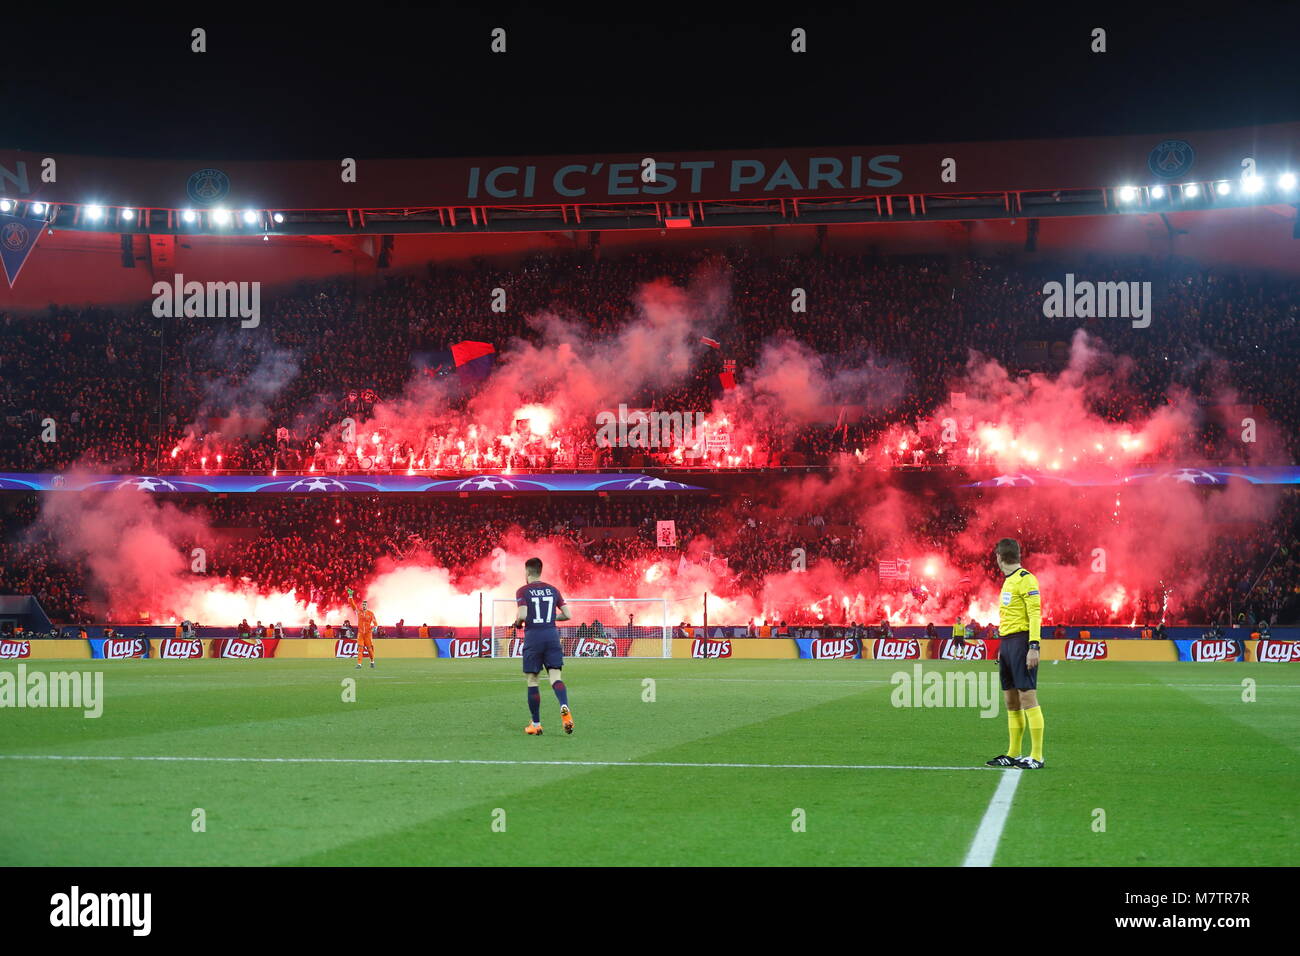 Psg Stadium High Resolution Stock Photography And Images Alamy